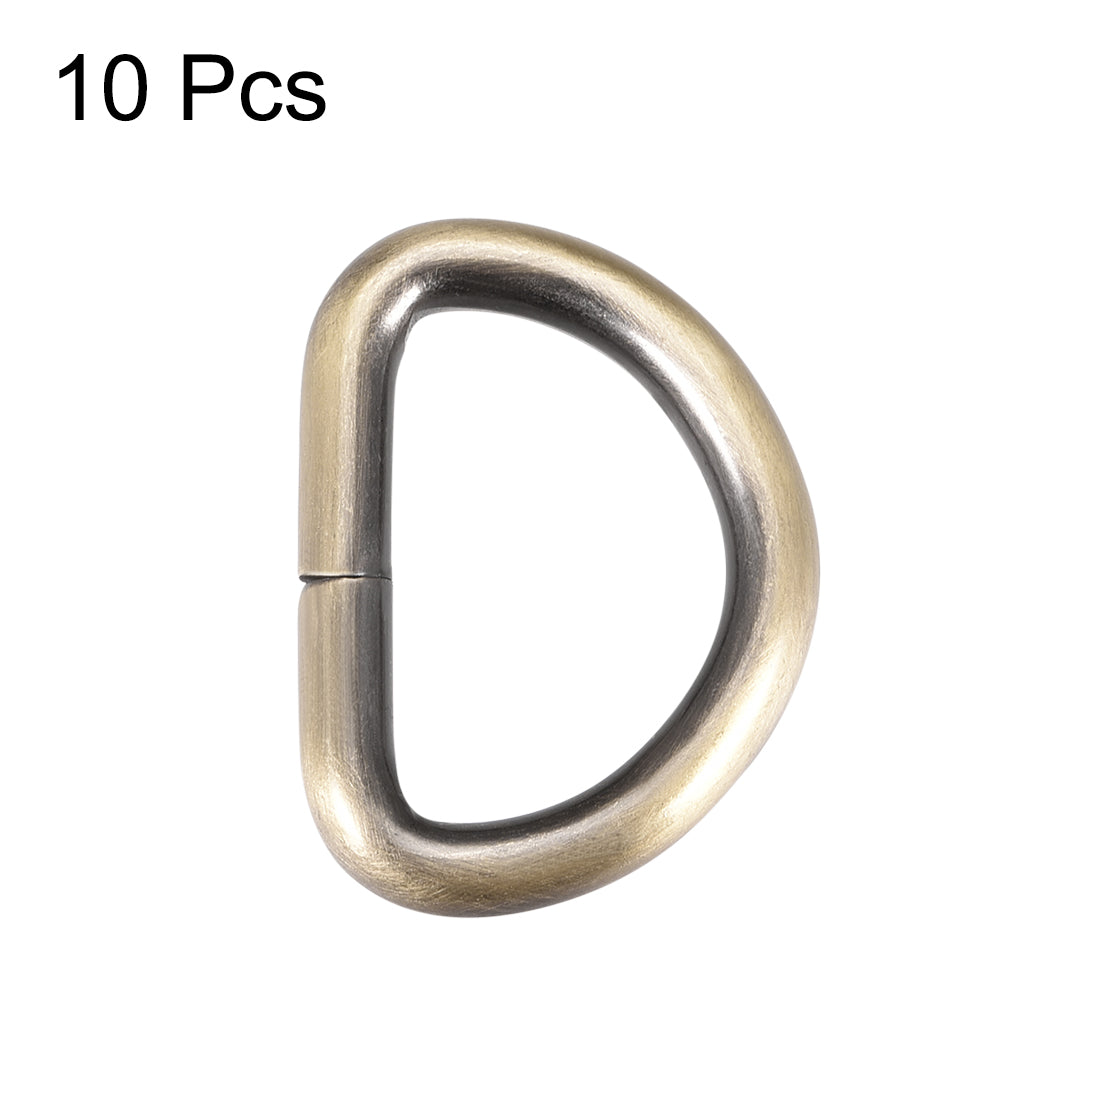 uxcell Uxcell 10 Pcs D Ring Buckle 1 Inch Metal Semi-Circular D-Rings Bronze Tone for Hardware Bags Belts Craft DIY Accessories